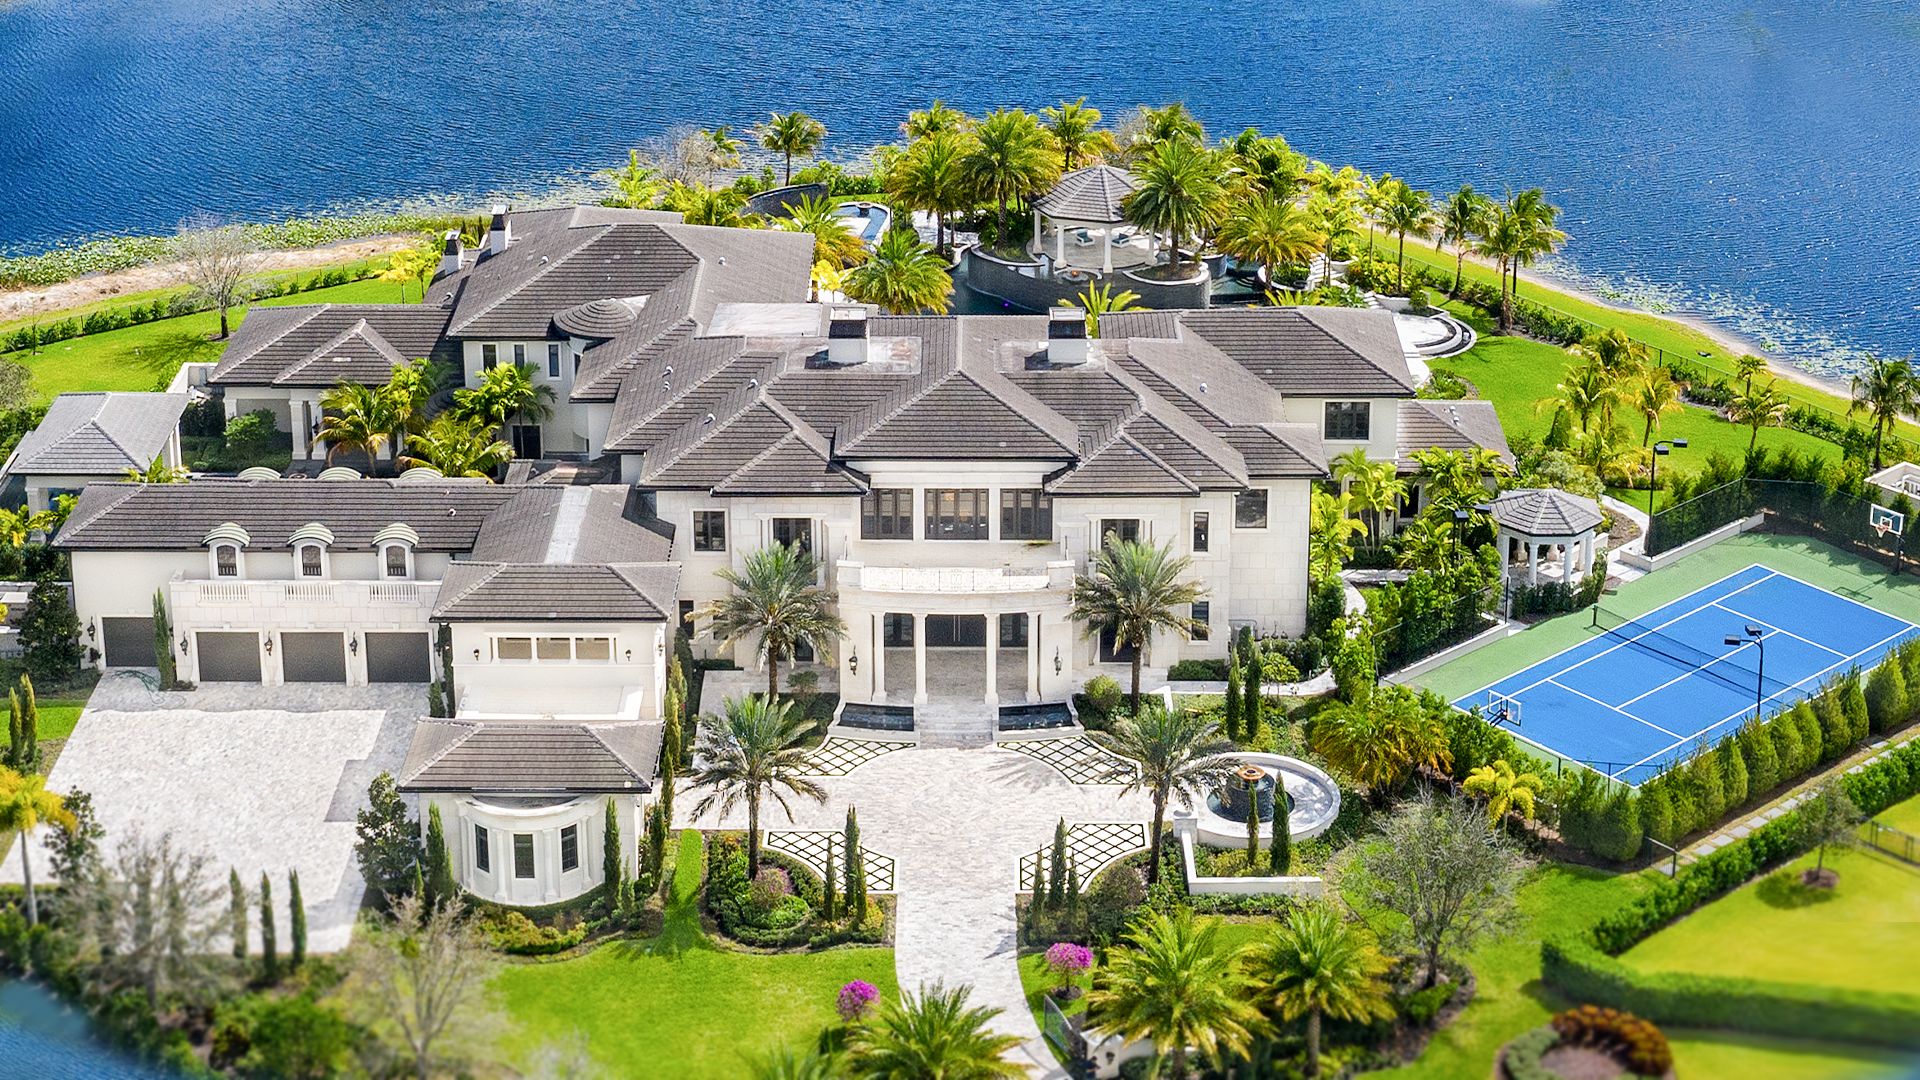 Watch Inside A 23000000 Mega Mansion On An Island On the